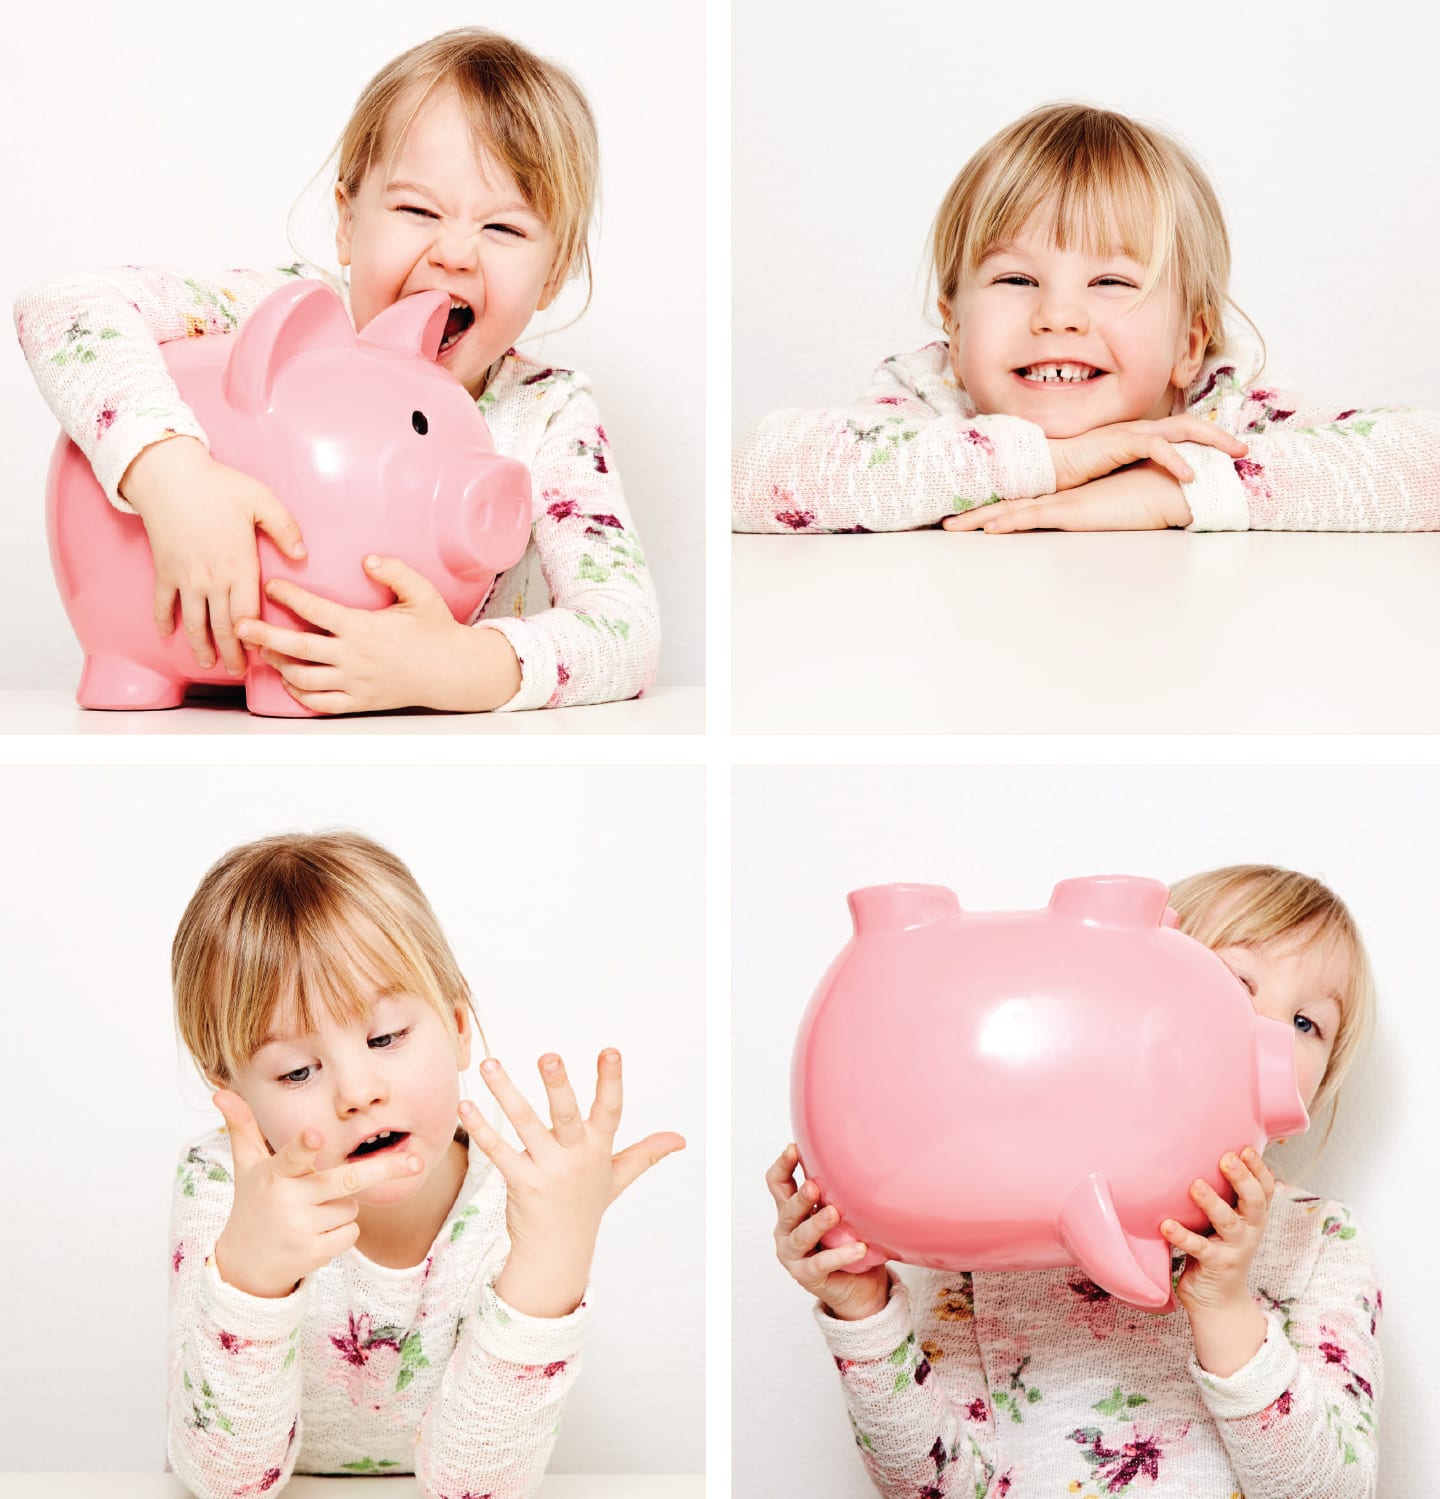 cute little blonde girl counting on her fingers and holding a piggy bank in chattanooga